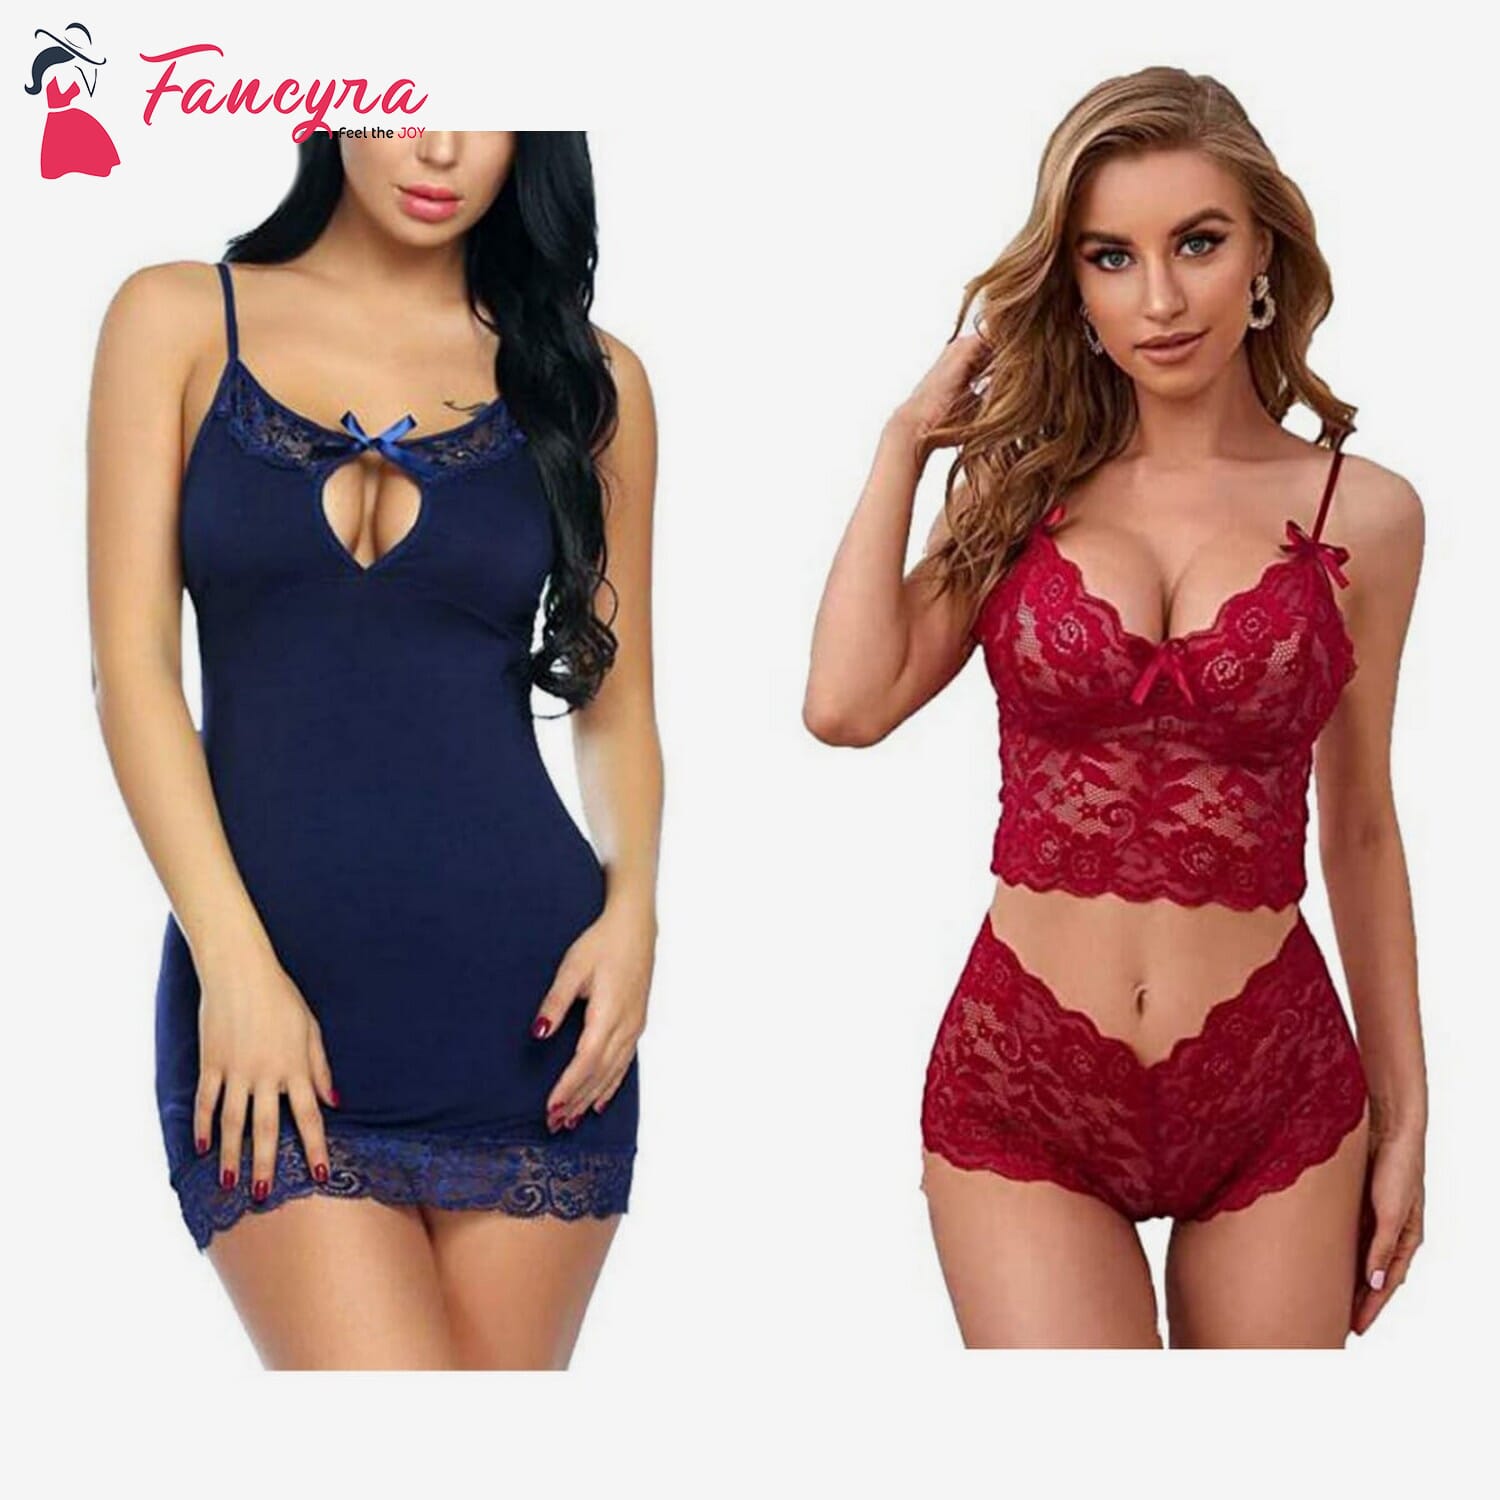 Combo set of Stylish Babydoll Lingerie With G String Panty and Bra Panty Set  Free Size Blue and Maroon Color price in Nepal